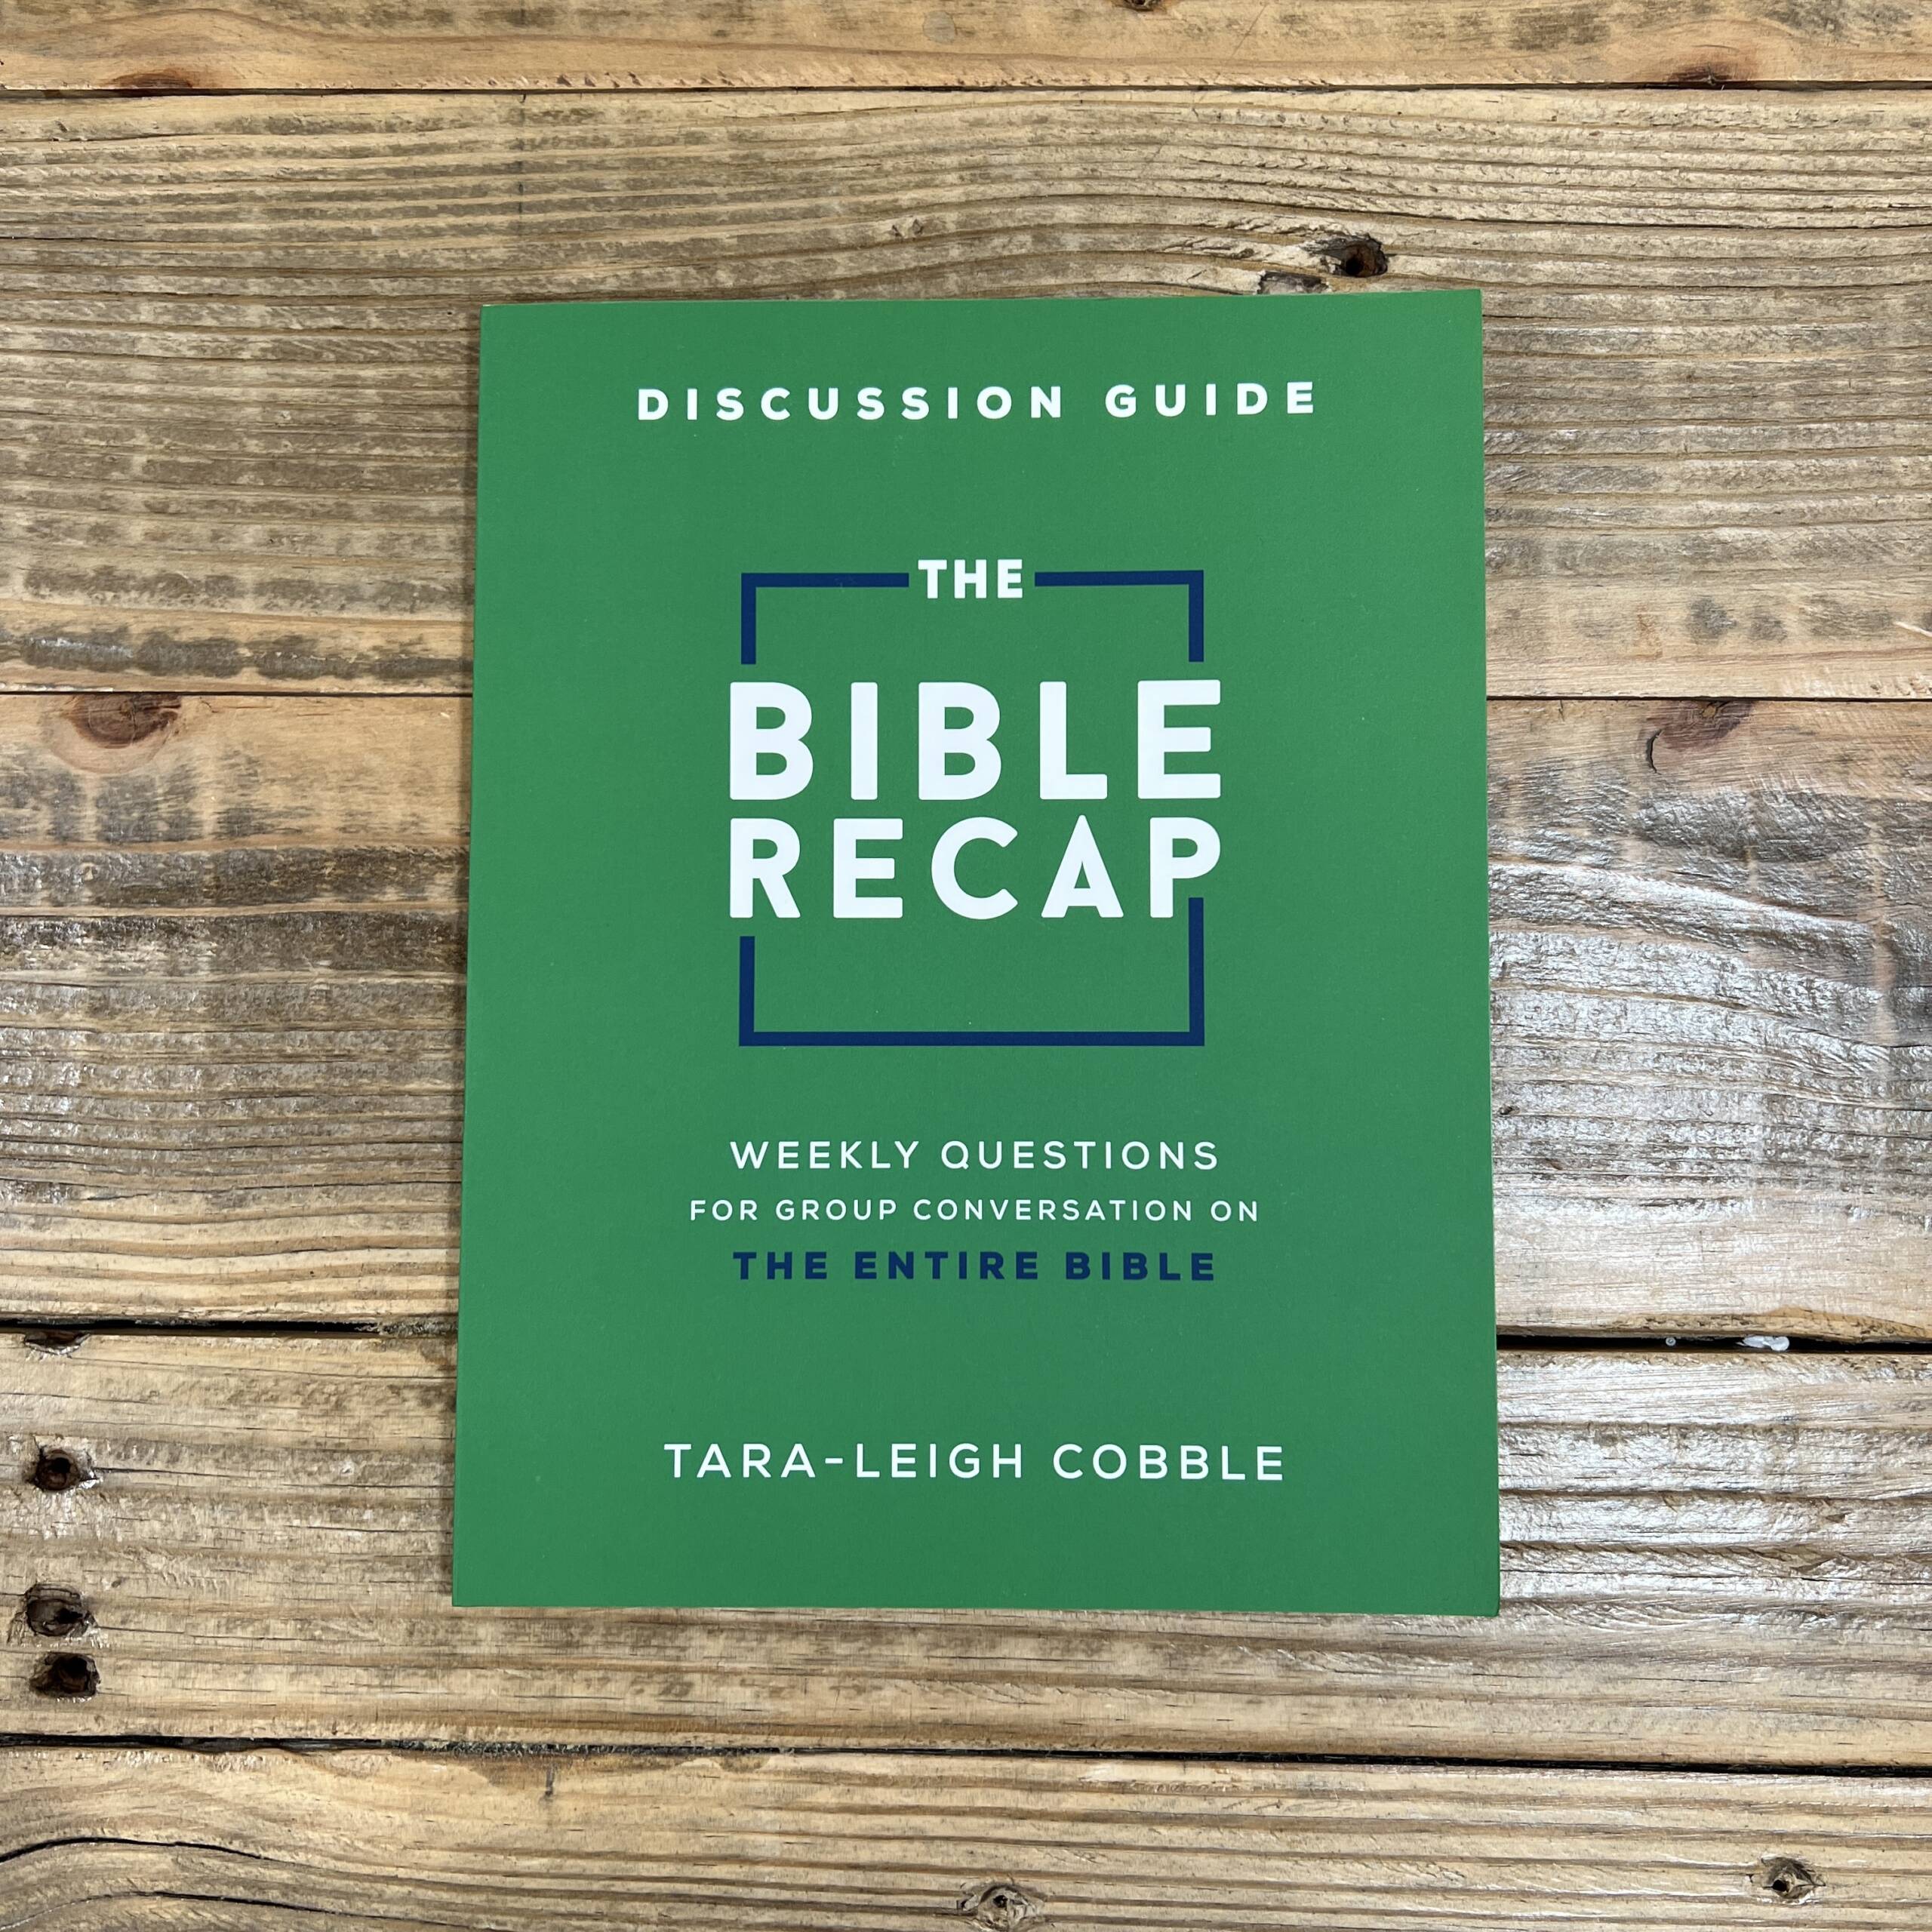 The Bible Recap Discussion Guide Weekly Questions for Group